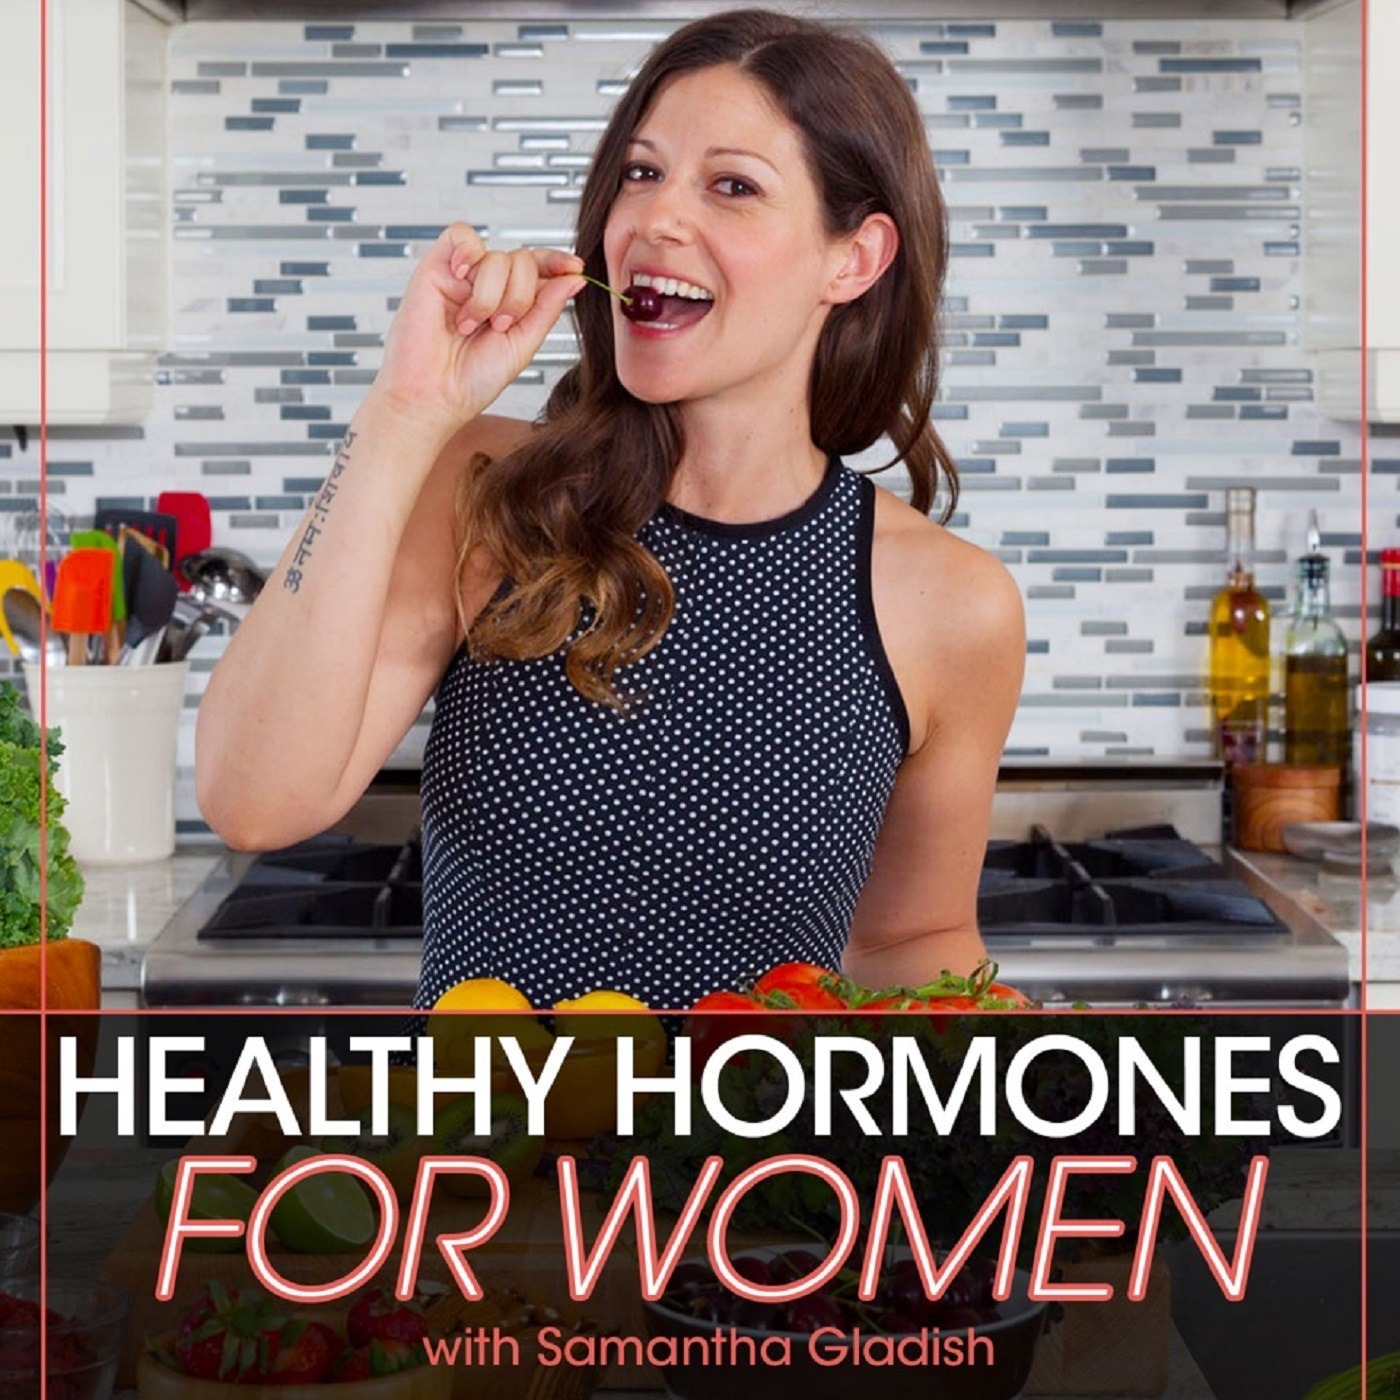 AVOID These Top Hormone Mistakes